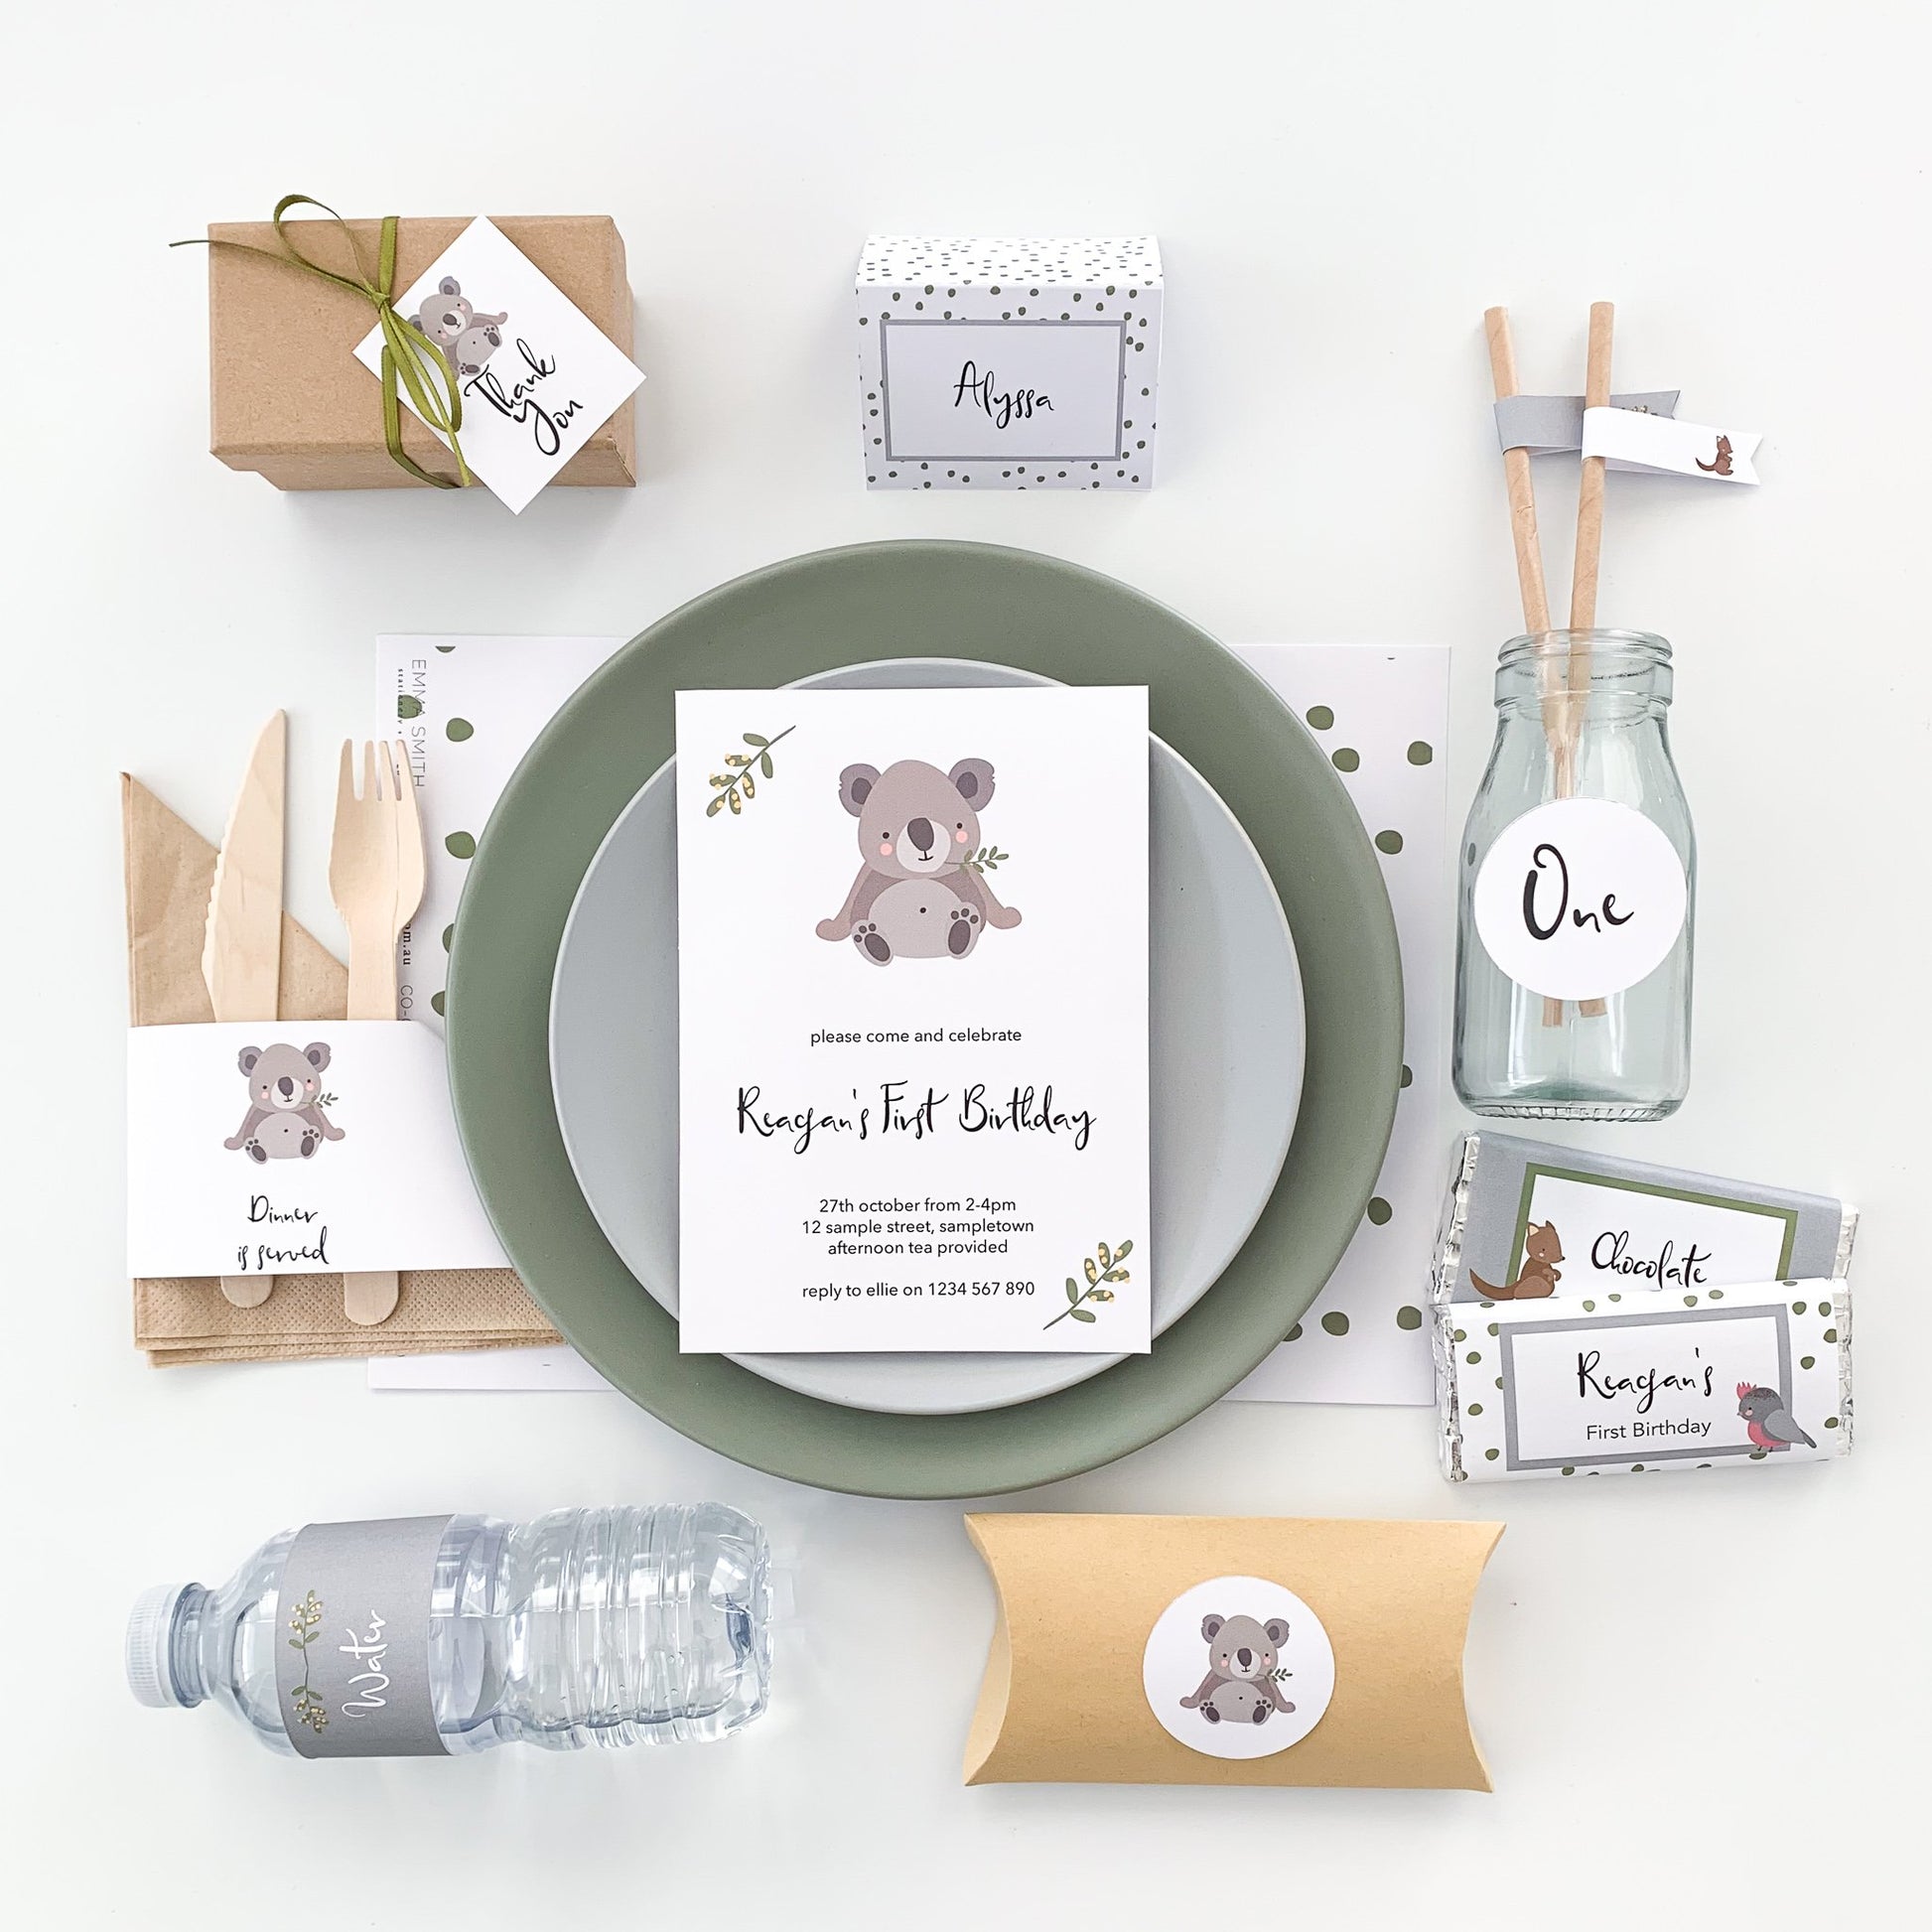 Aussie Cuties Printable Invitation with Koala printed out and displayed on products- The Printable Place